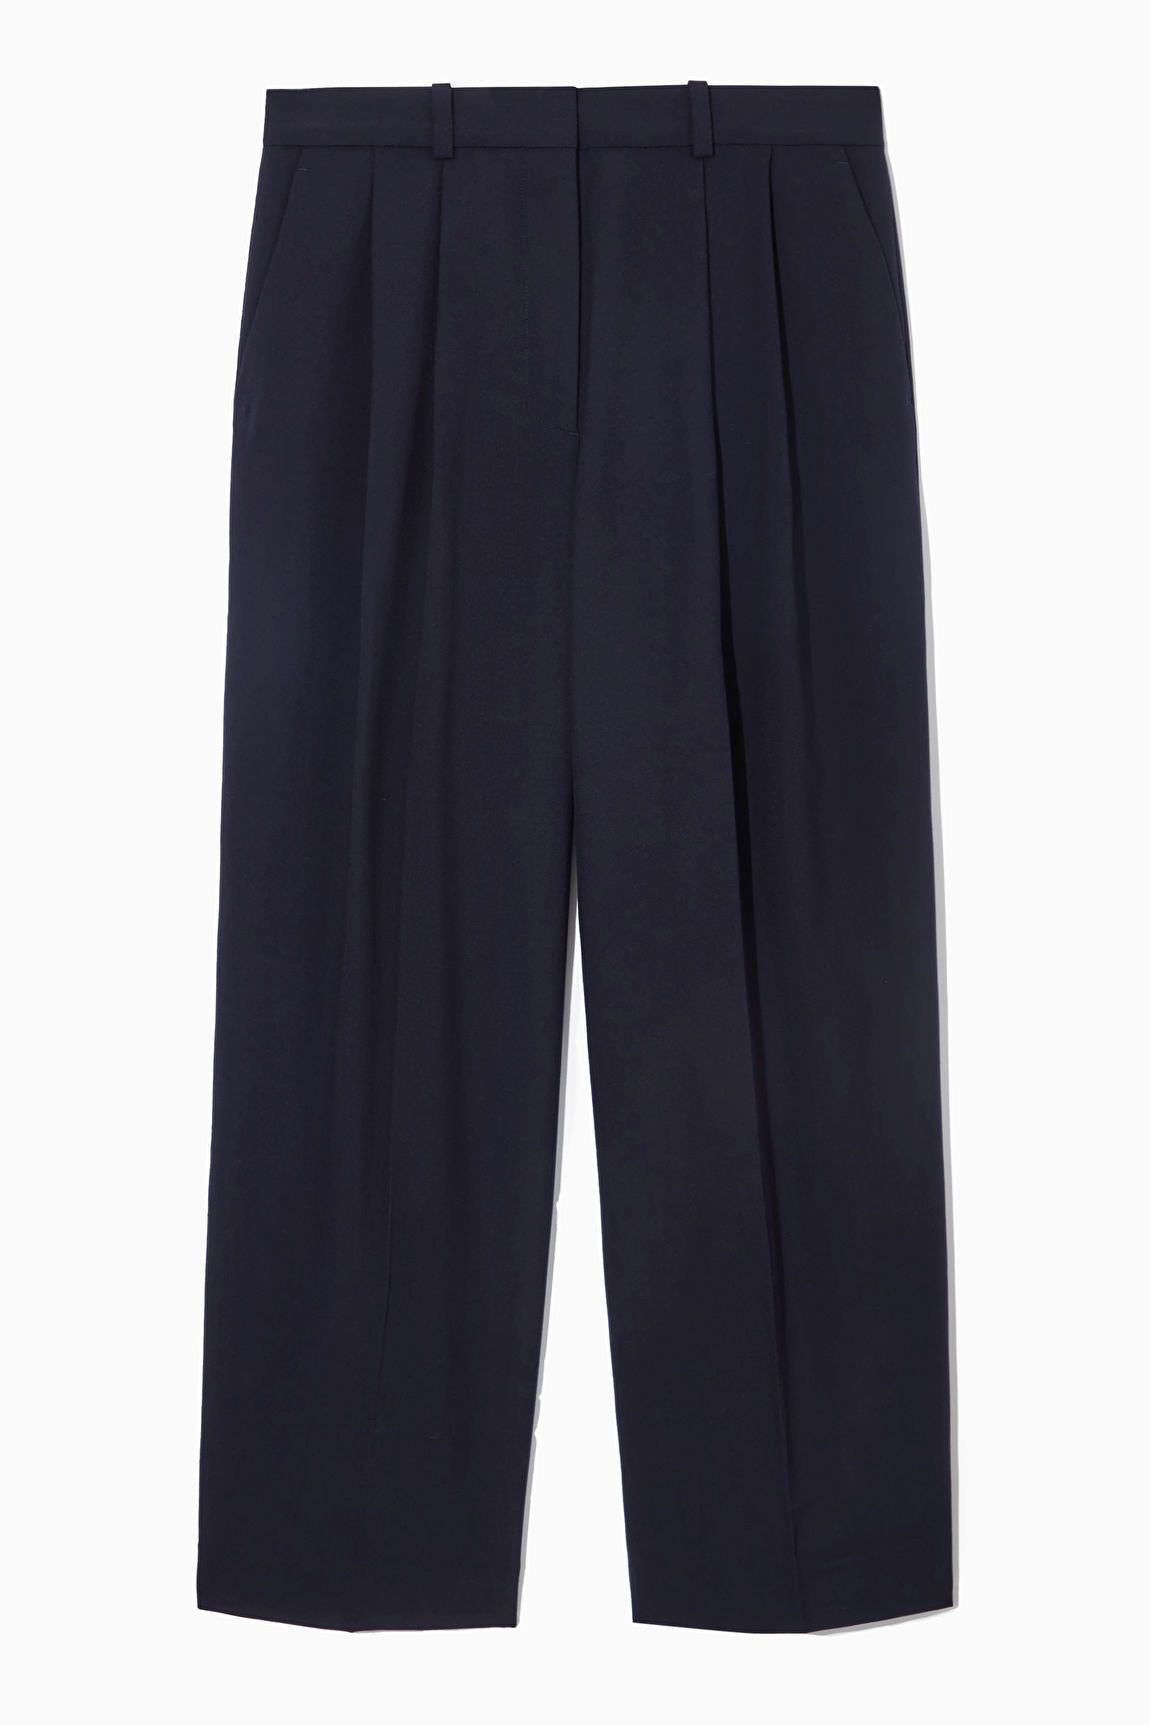 WIDE-LEG TAILORED WOOL TROUSERS - NAVY - COS | COS UK